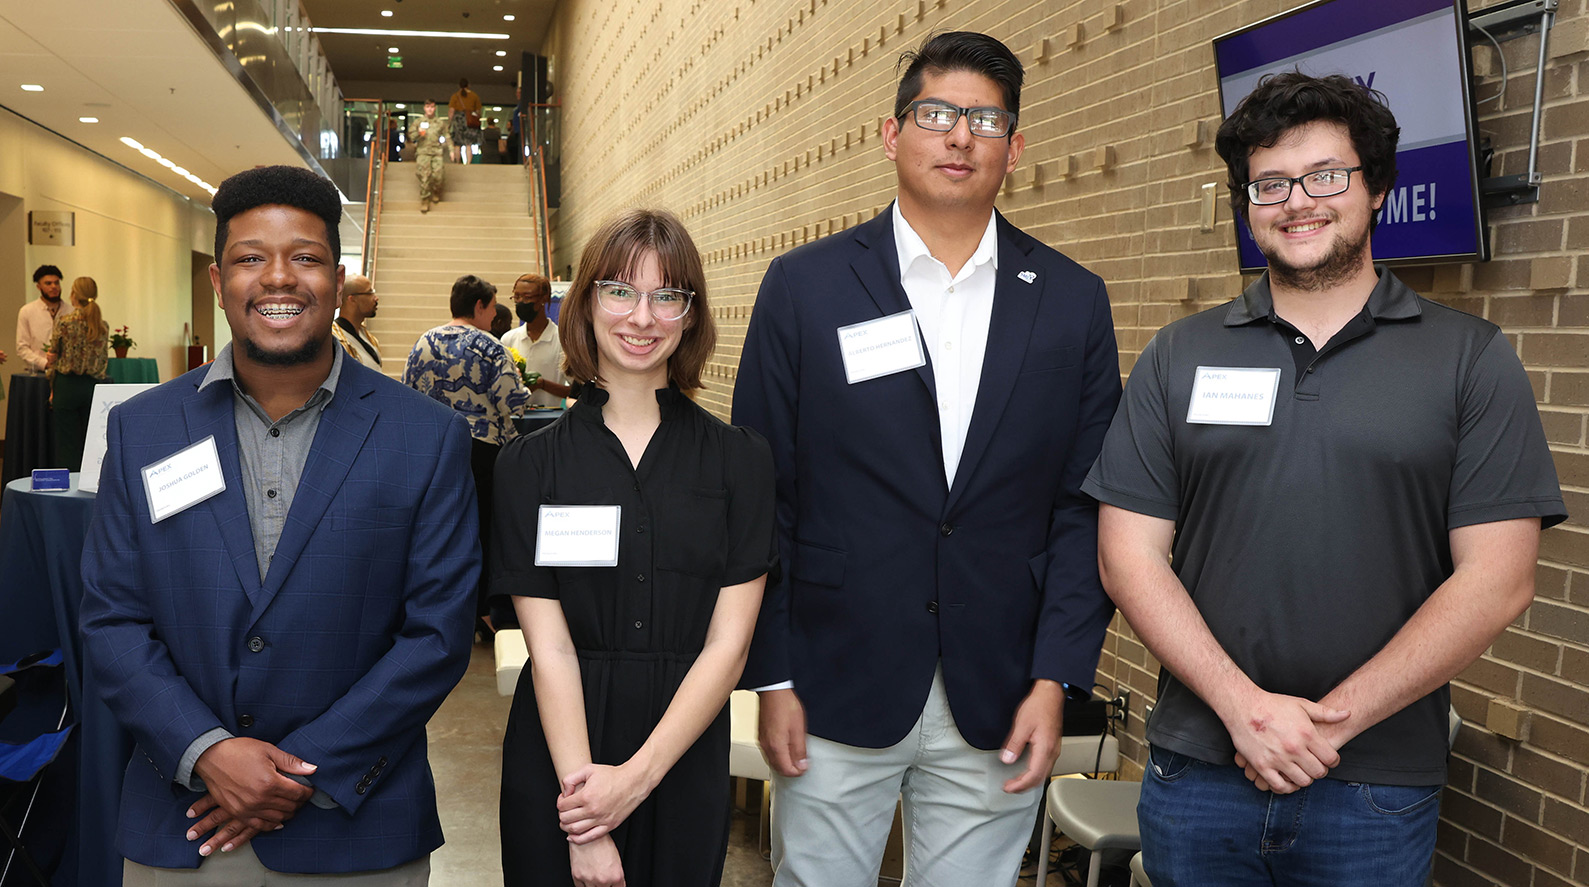 Four SMC students standing together at a career event.